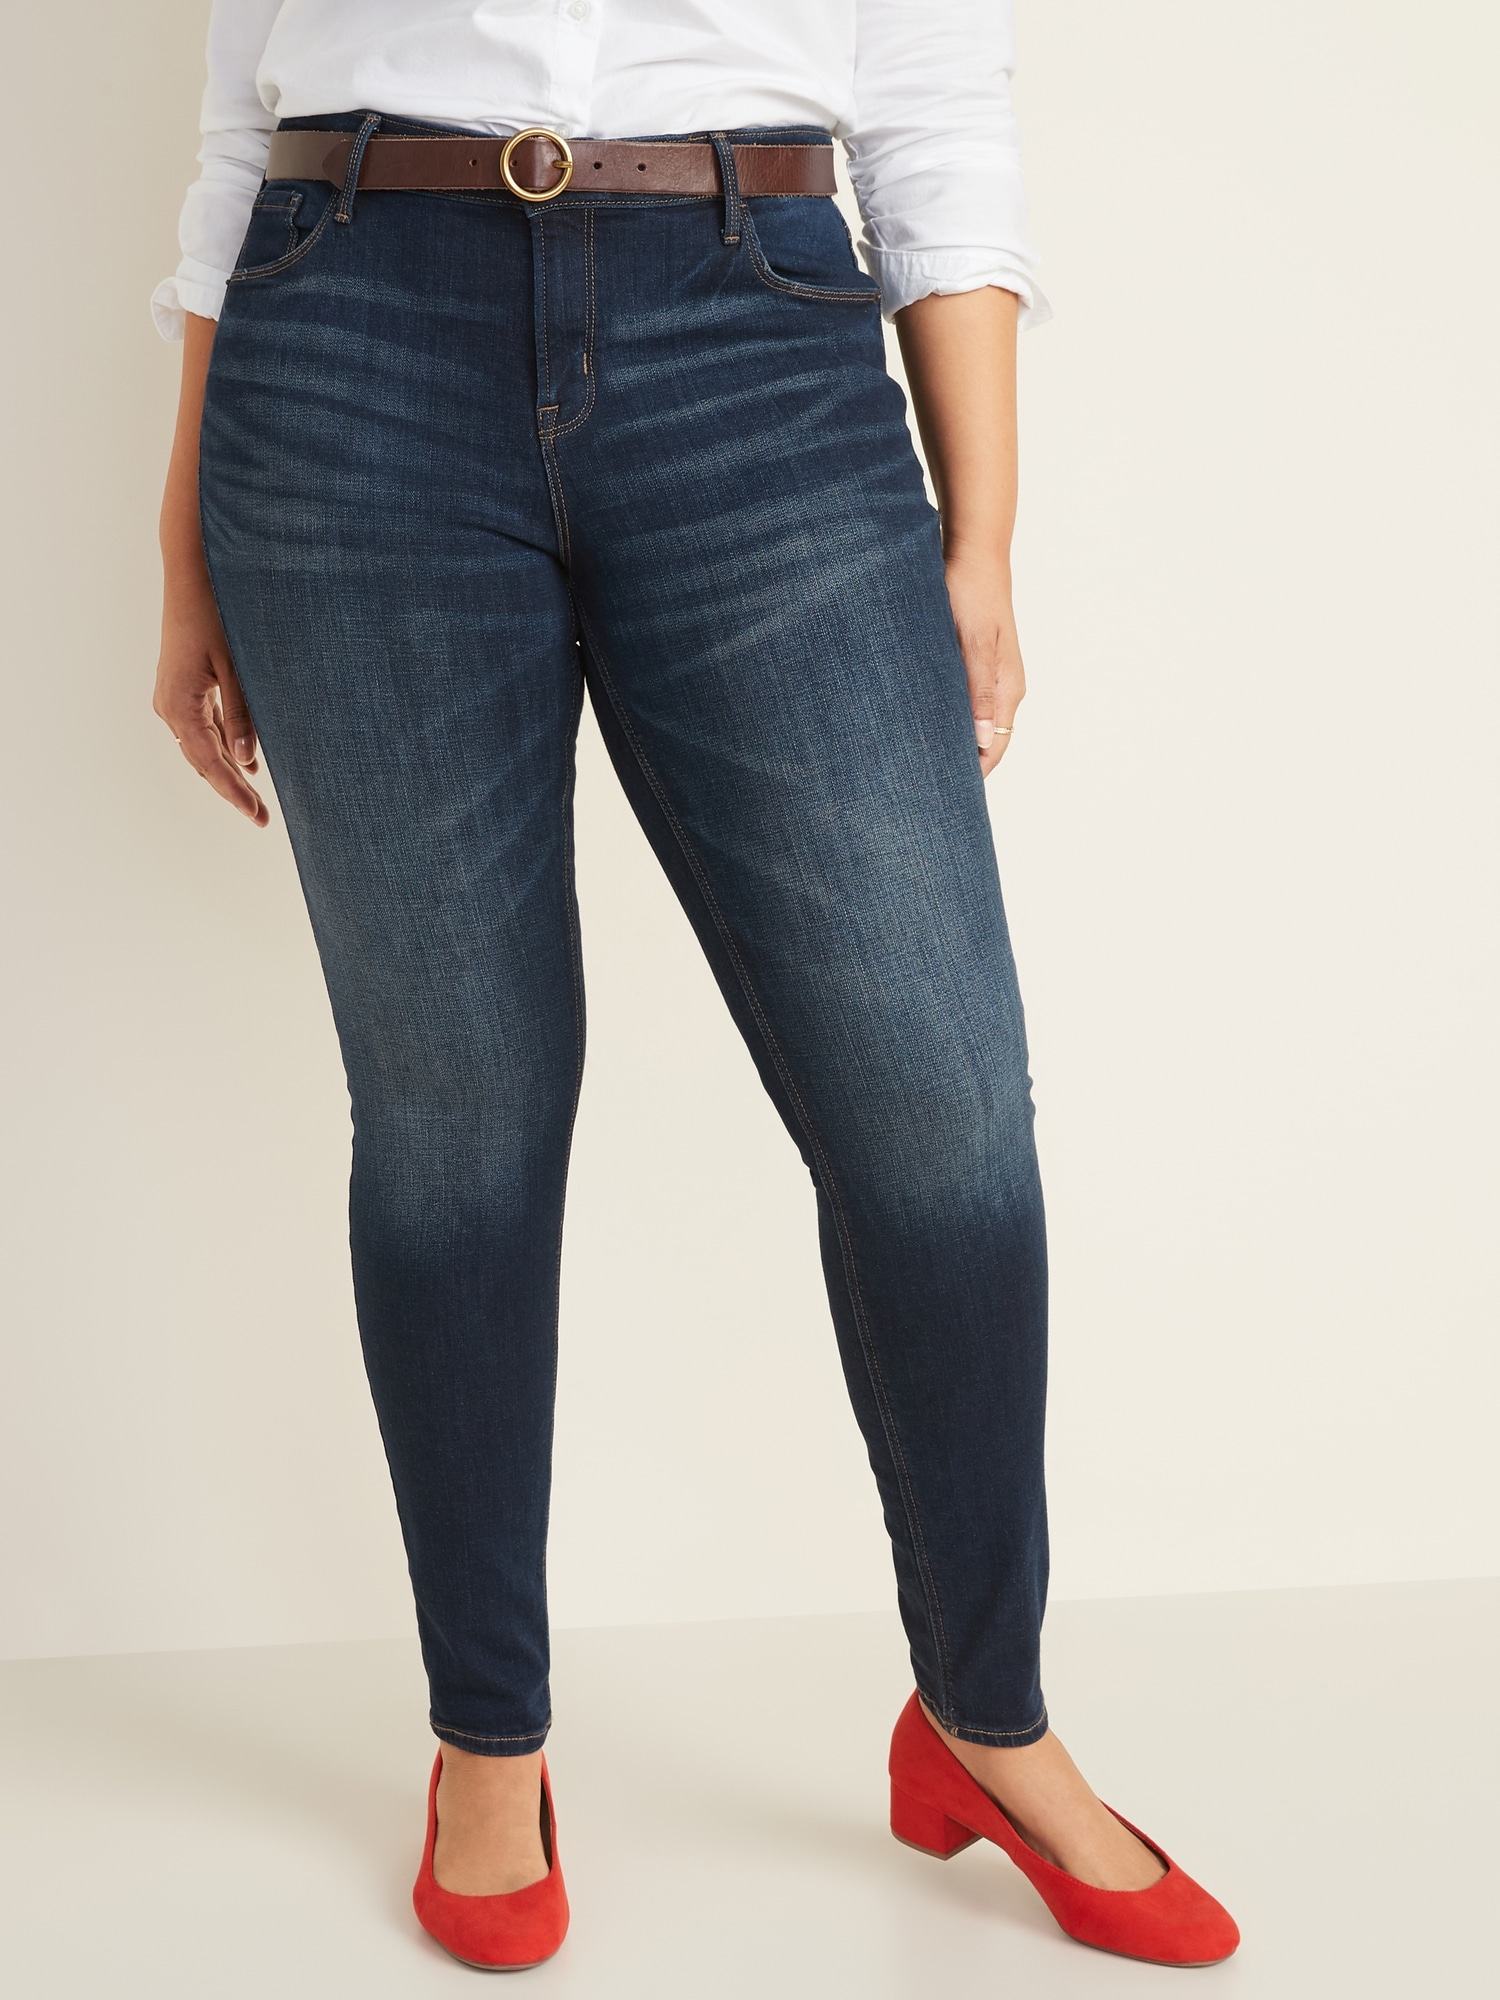 old navy red rockstar jeans